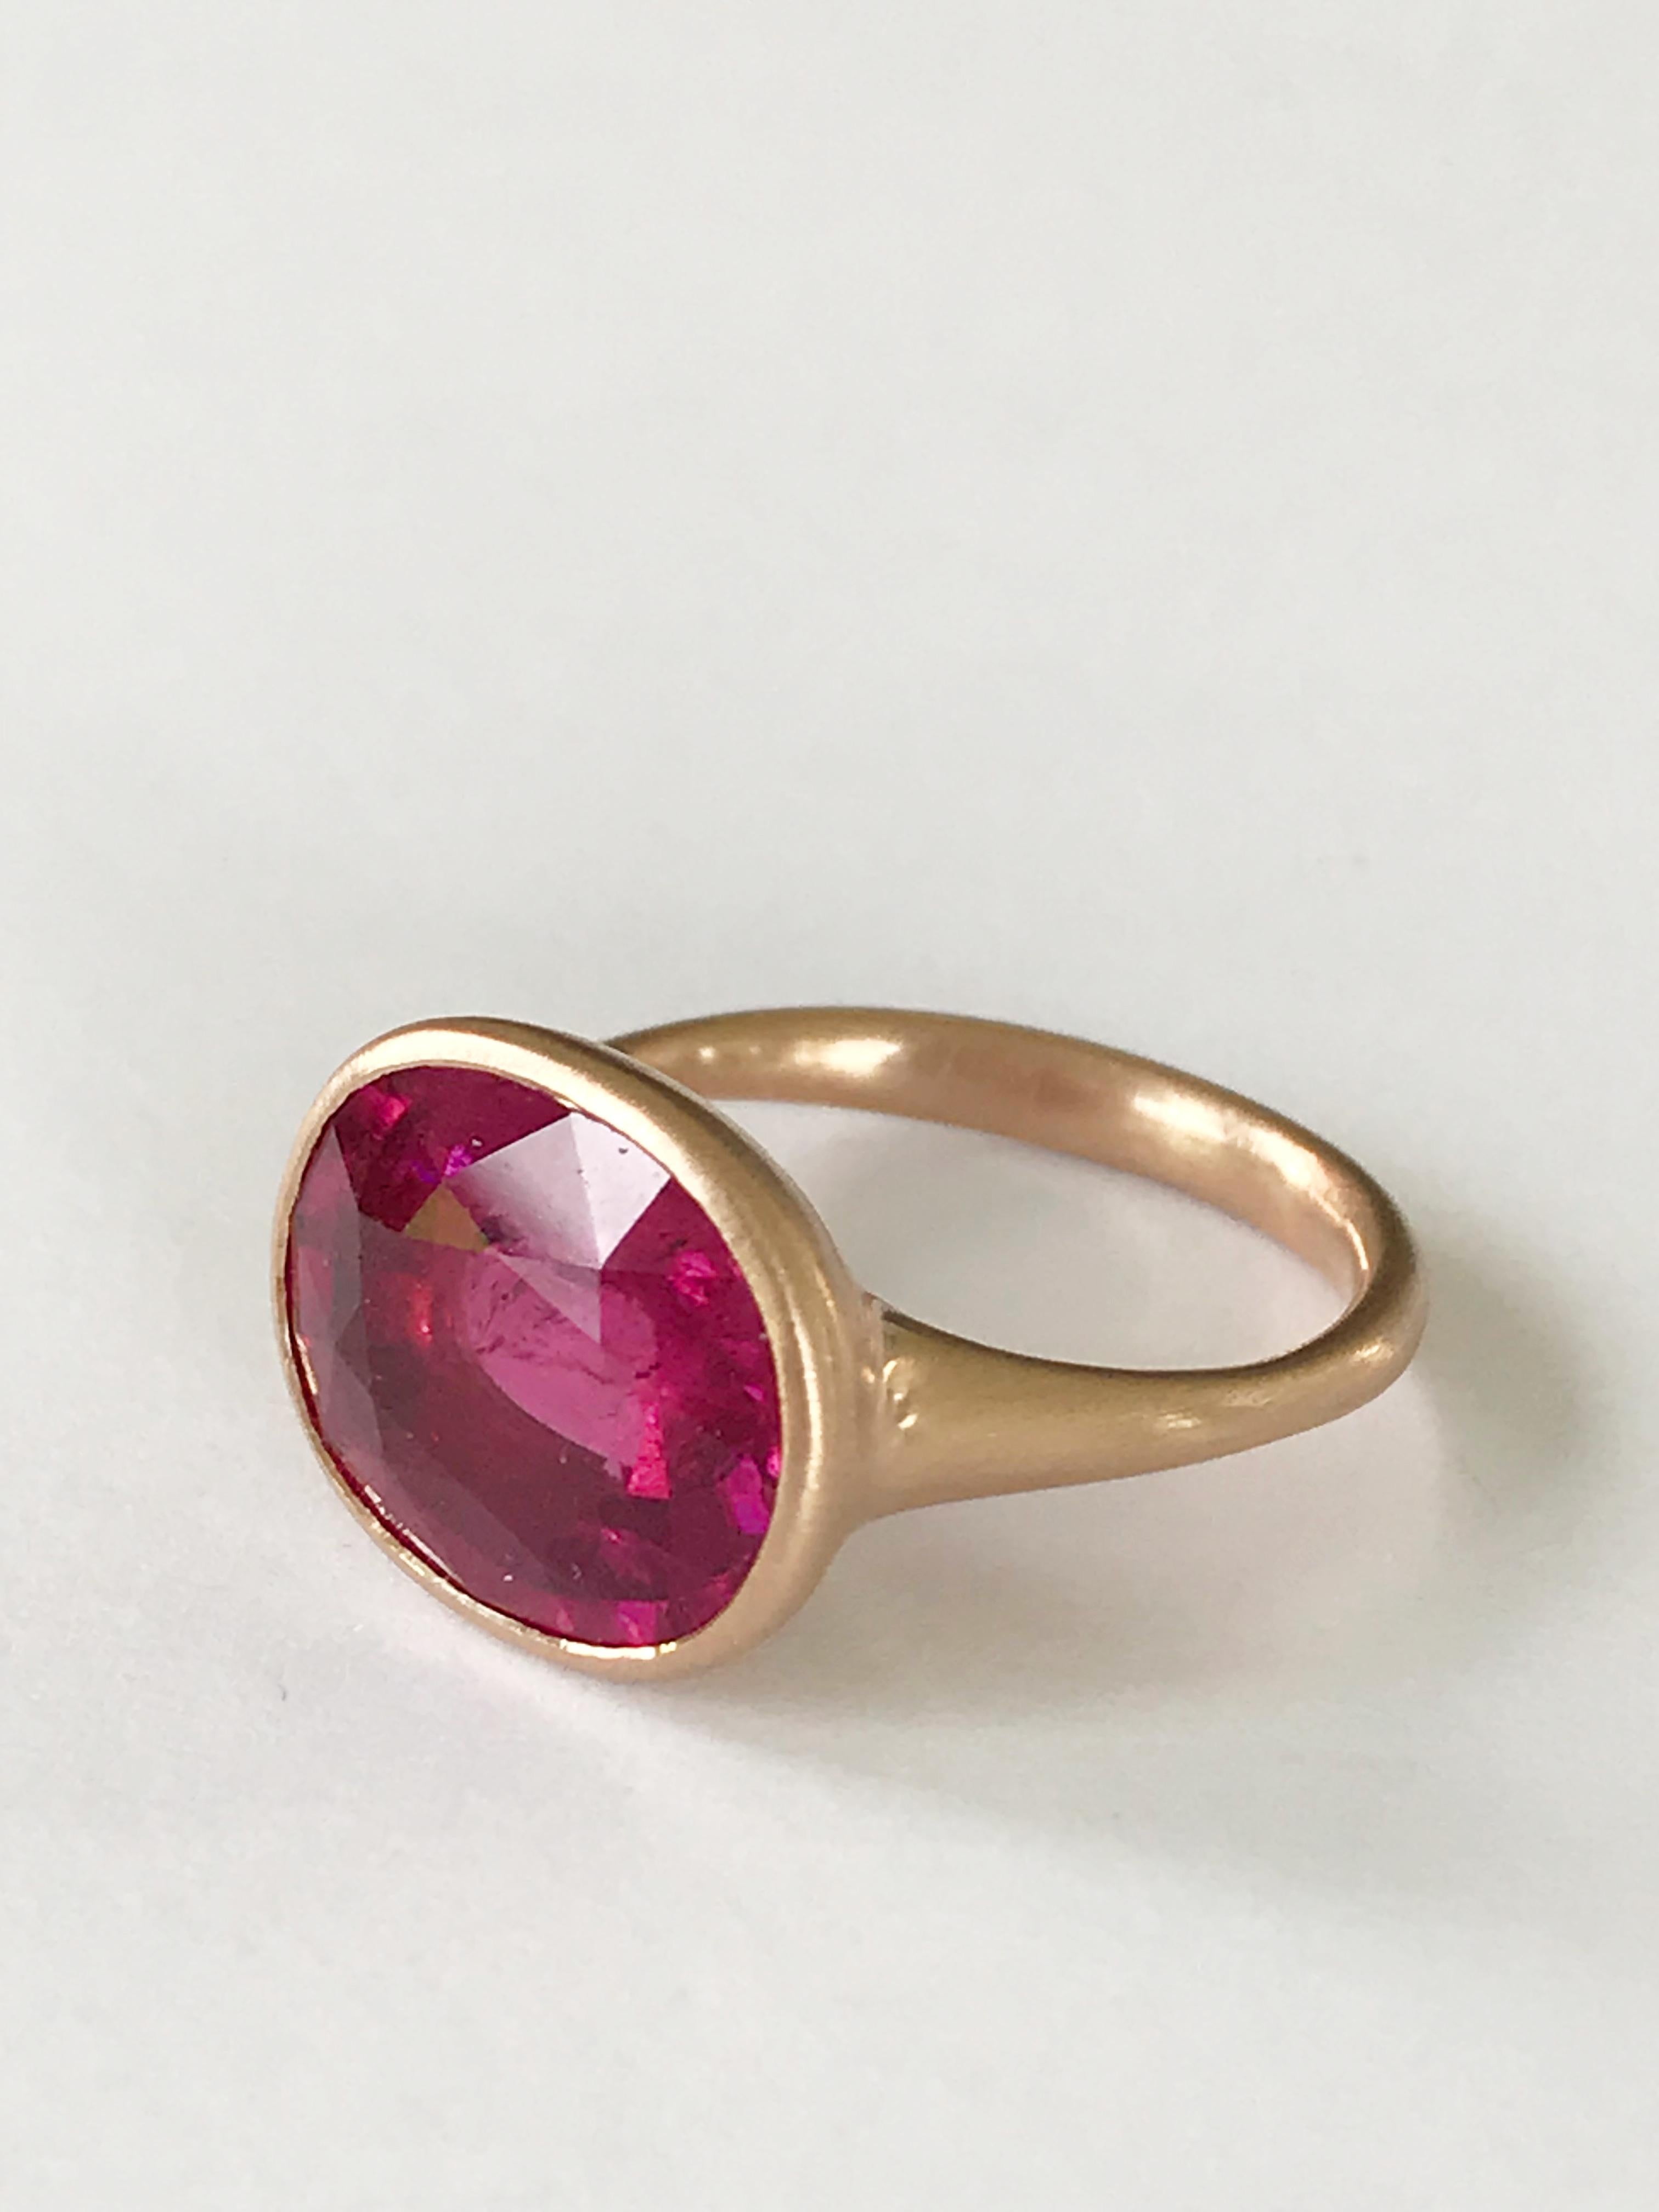 Dalben design  18k rose gold matte finishing ring with a 6,20 carat bezel-set oval faceted cut Rubellite ( Red Tourmaline ). 
Ring size 7 1/4 USA - EU 55 re-sizable to most finger sizes. 
Bezel stone dimensions :
height 12,4 mm
width 14,9 mm
The